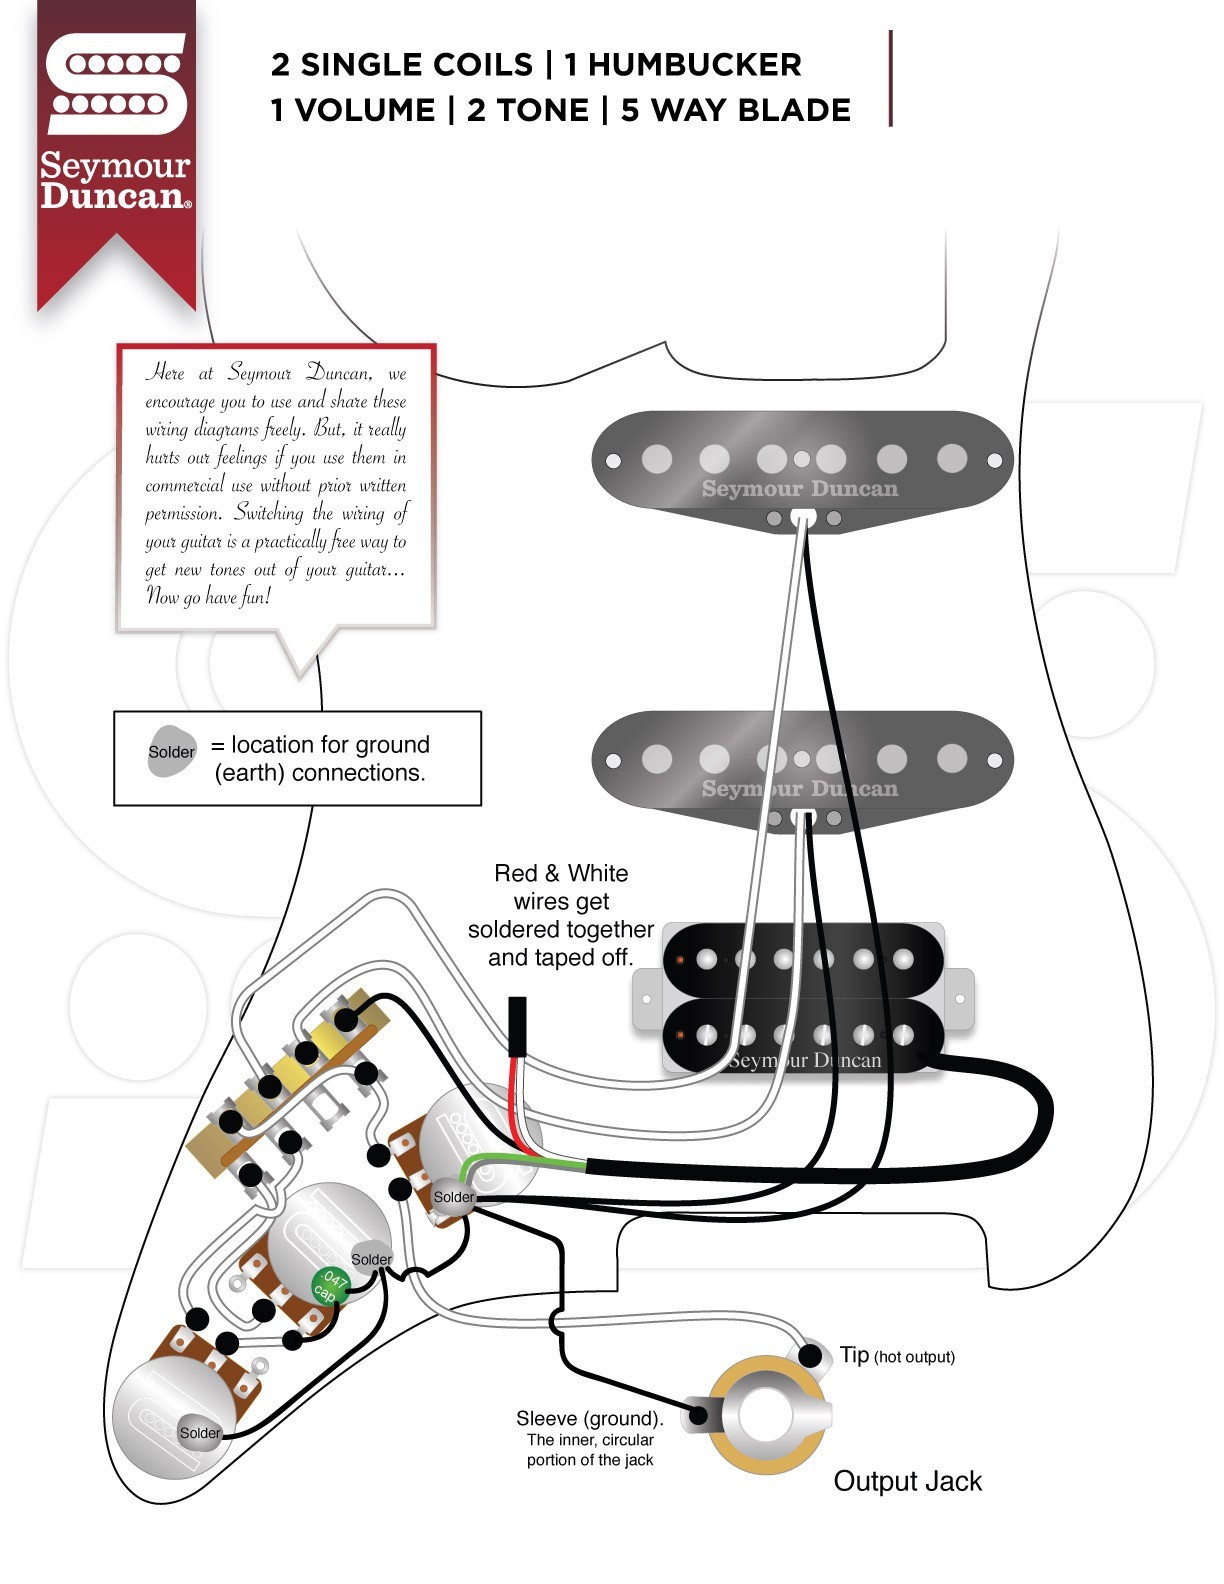 Wiring Diagram For e Pickup Guitar Valid Electric Guitar Wiring Diagram E Pickup Fresh Wiring Diagrams